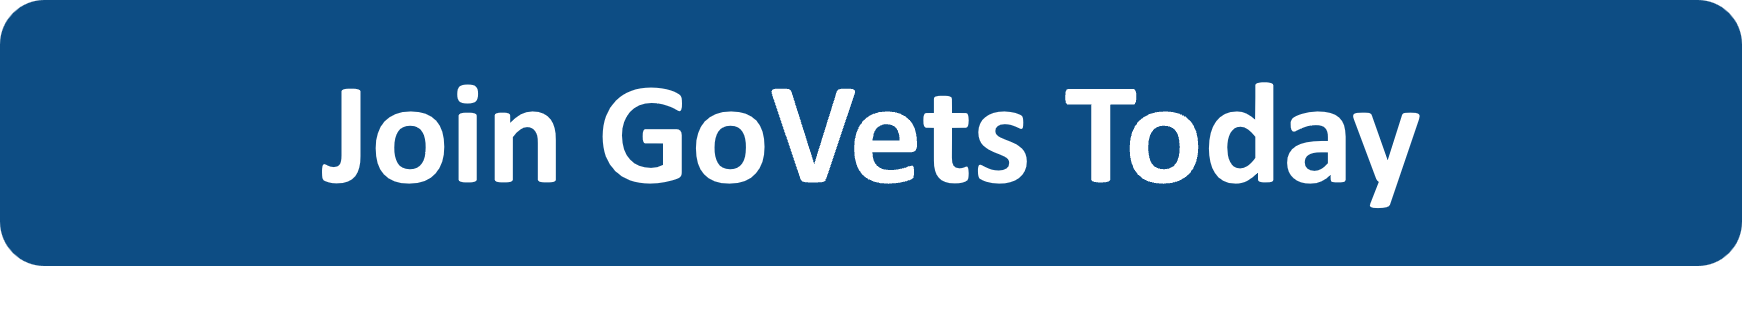 Join GoVets Today - Become a Member and Enjoy Exclusive Benefits to Medallion Rewards, GoVets Giving and GoVets Cash